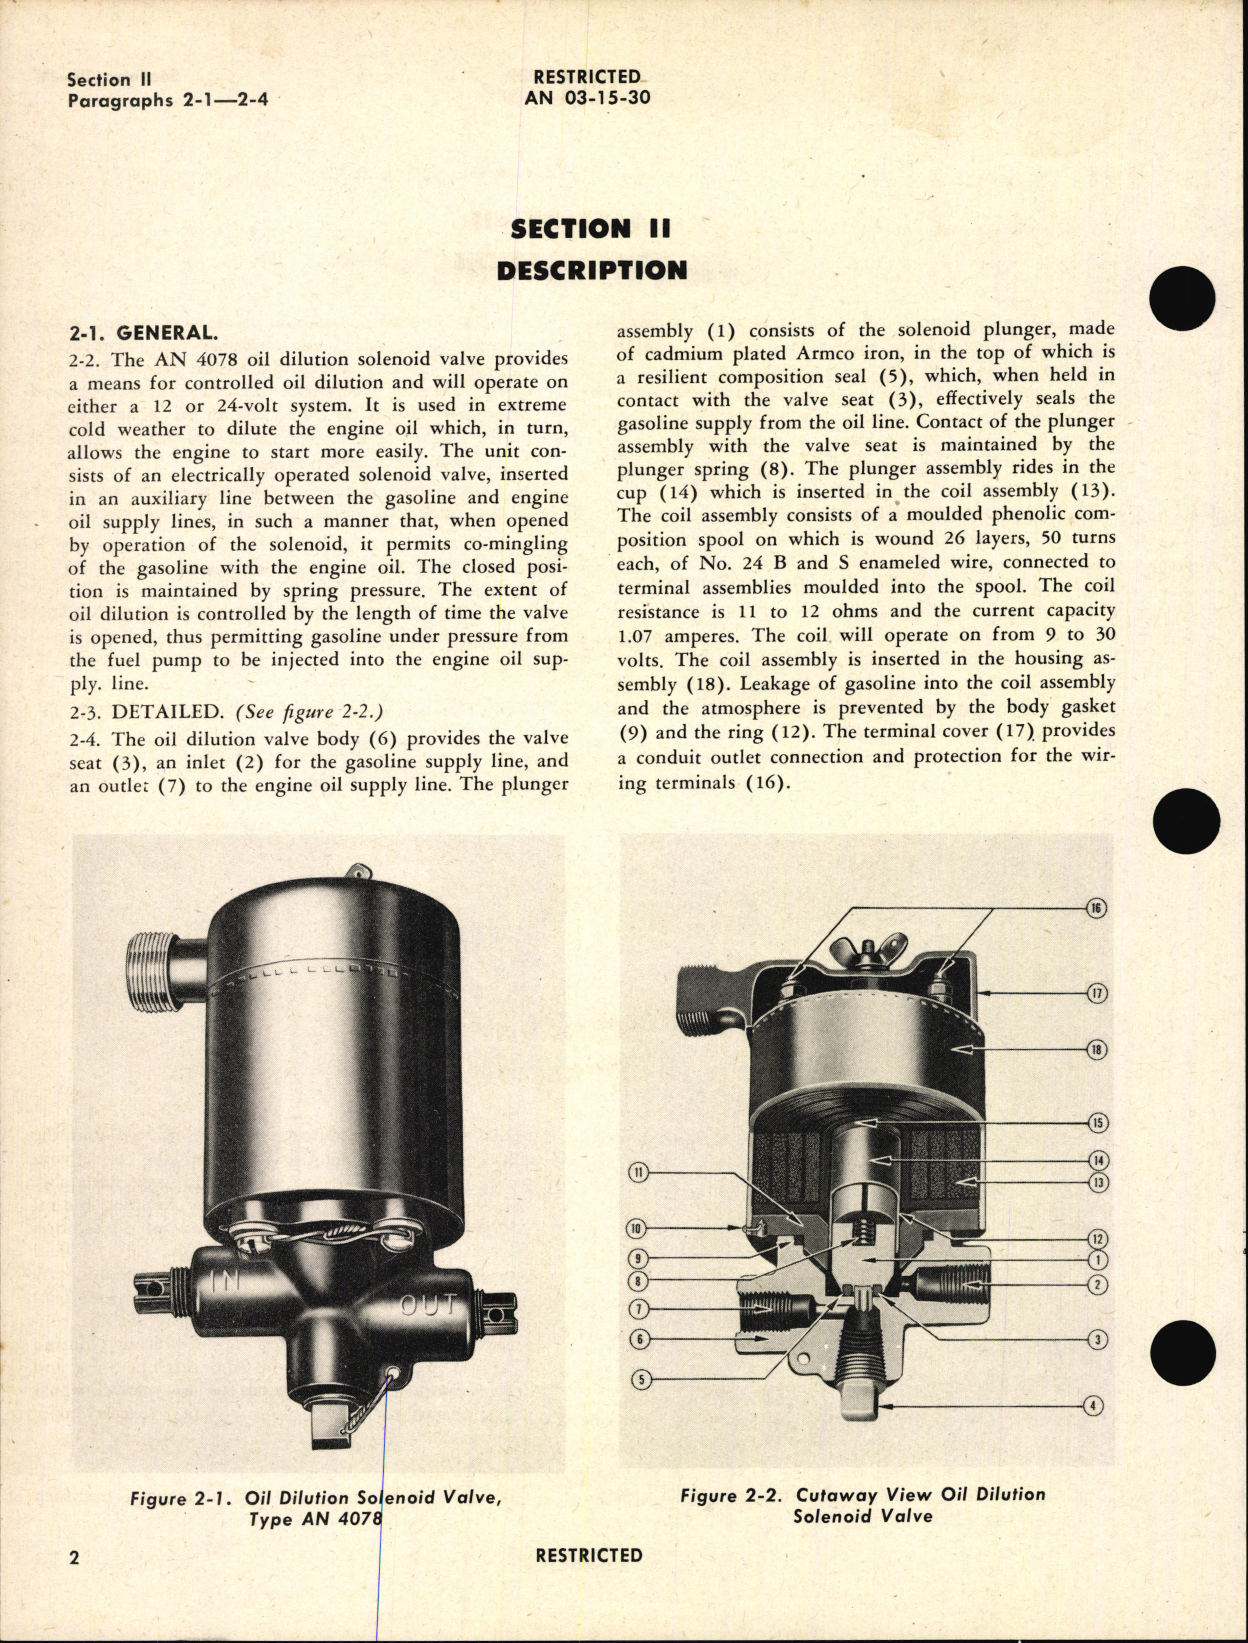 Sample page 4 from AirCorps Library document: Operation and Service Instructions for Oil Dilution Solenoid Valve Type AN4078